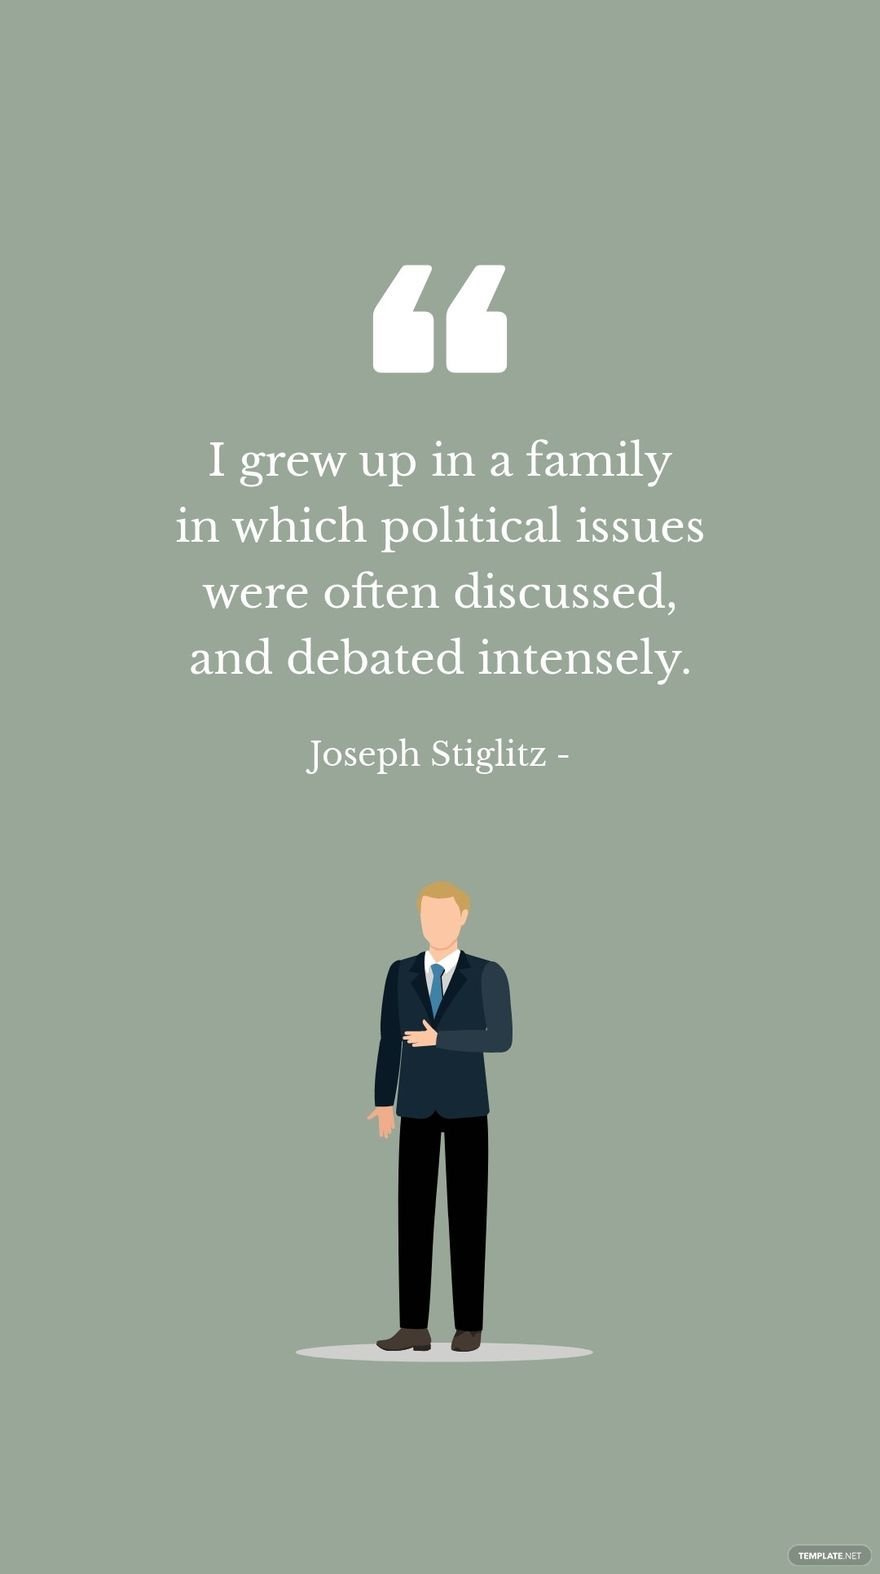 Joseph Stiglitz - I grew up in a family in which political issues were often discussed, and debated intensely.